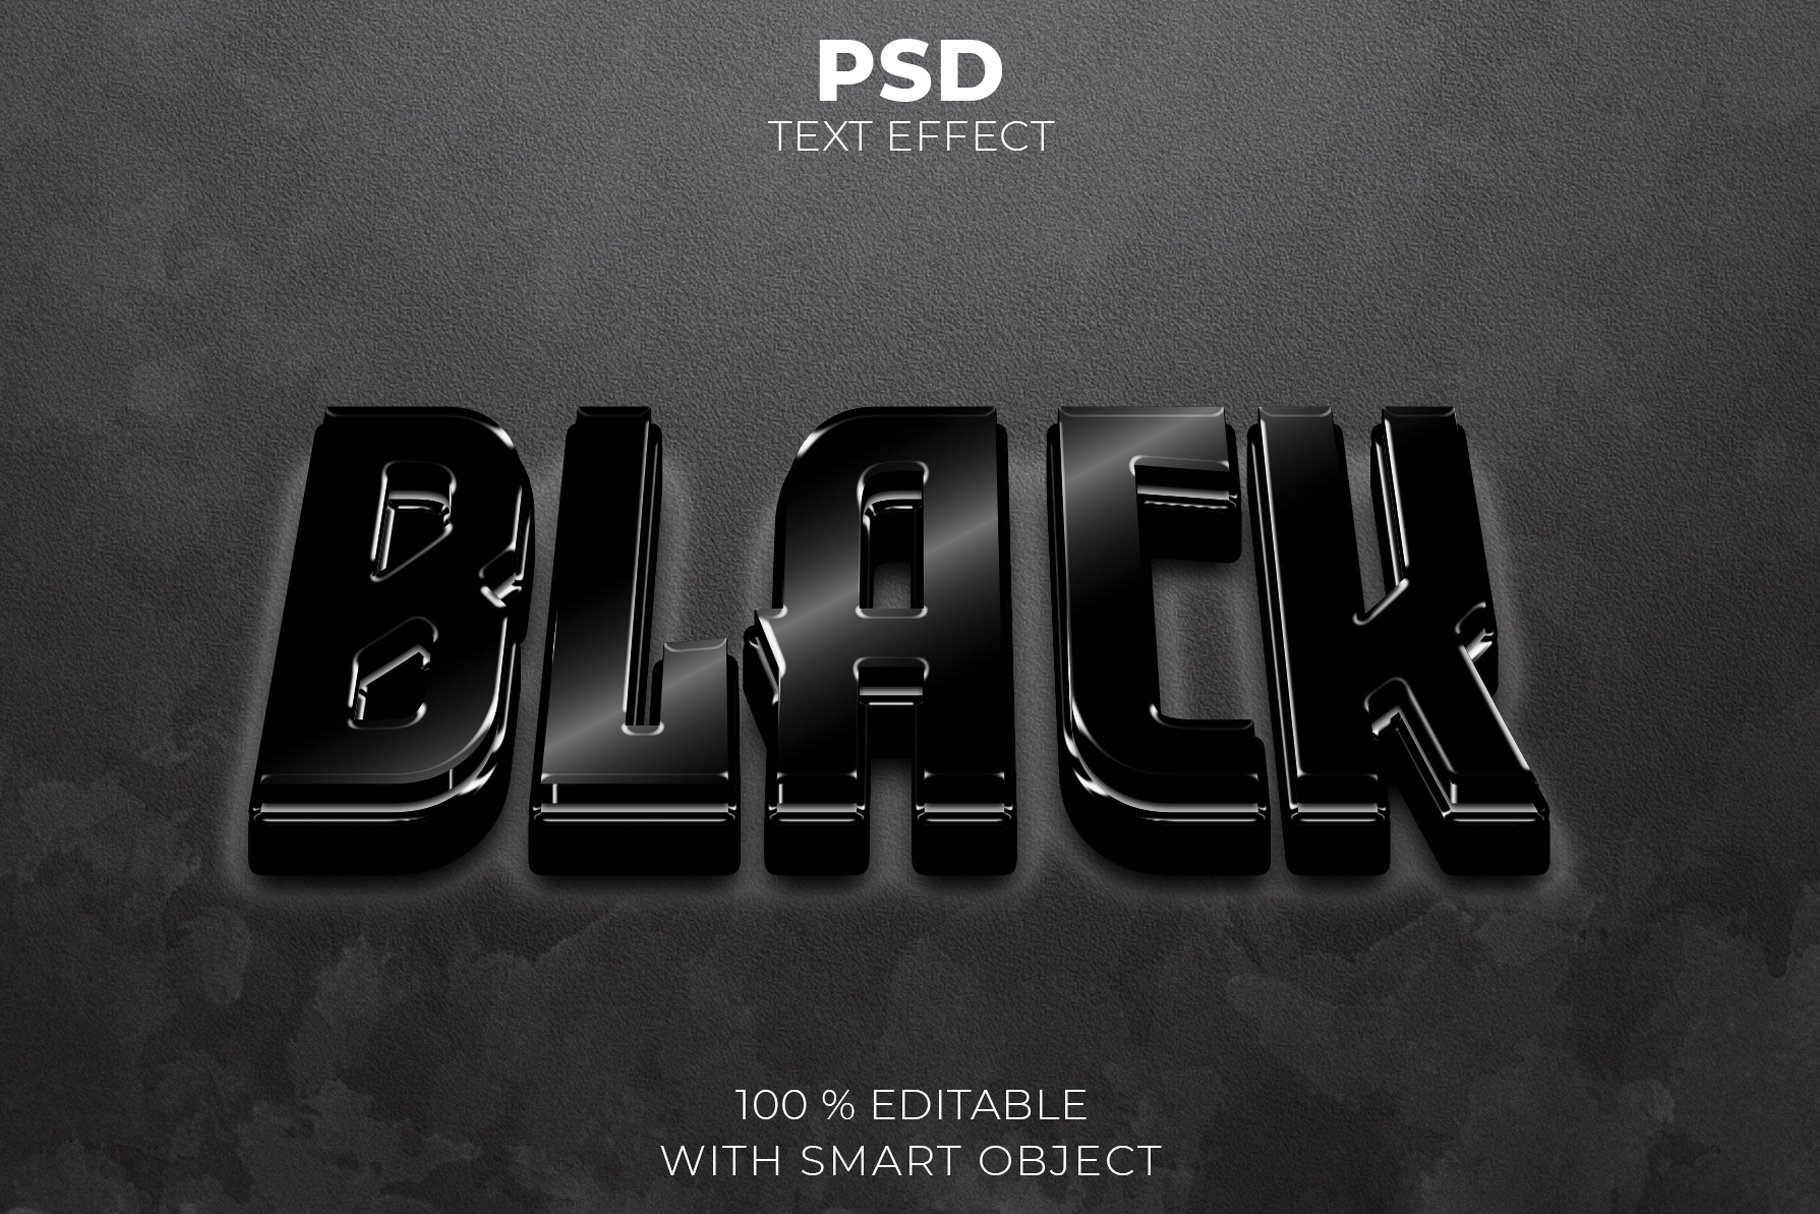 Black shiny 3D text effectcover image.